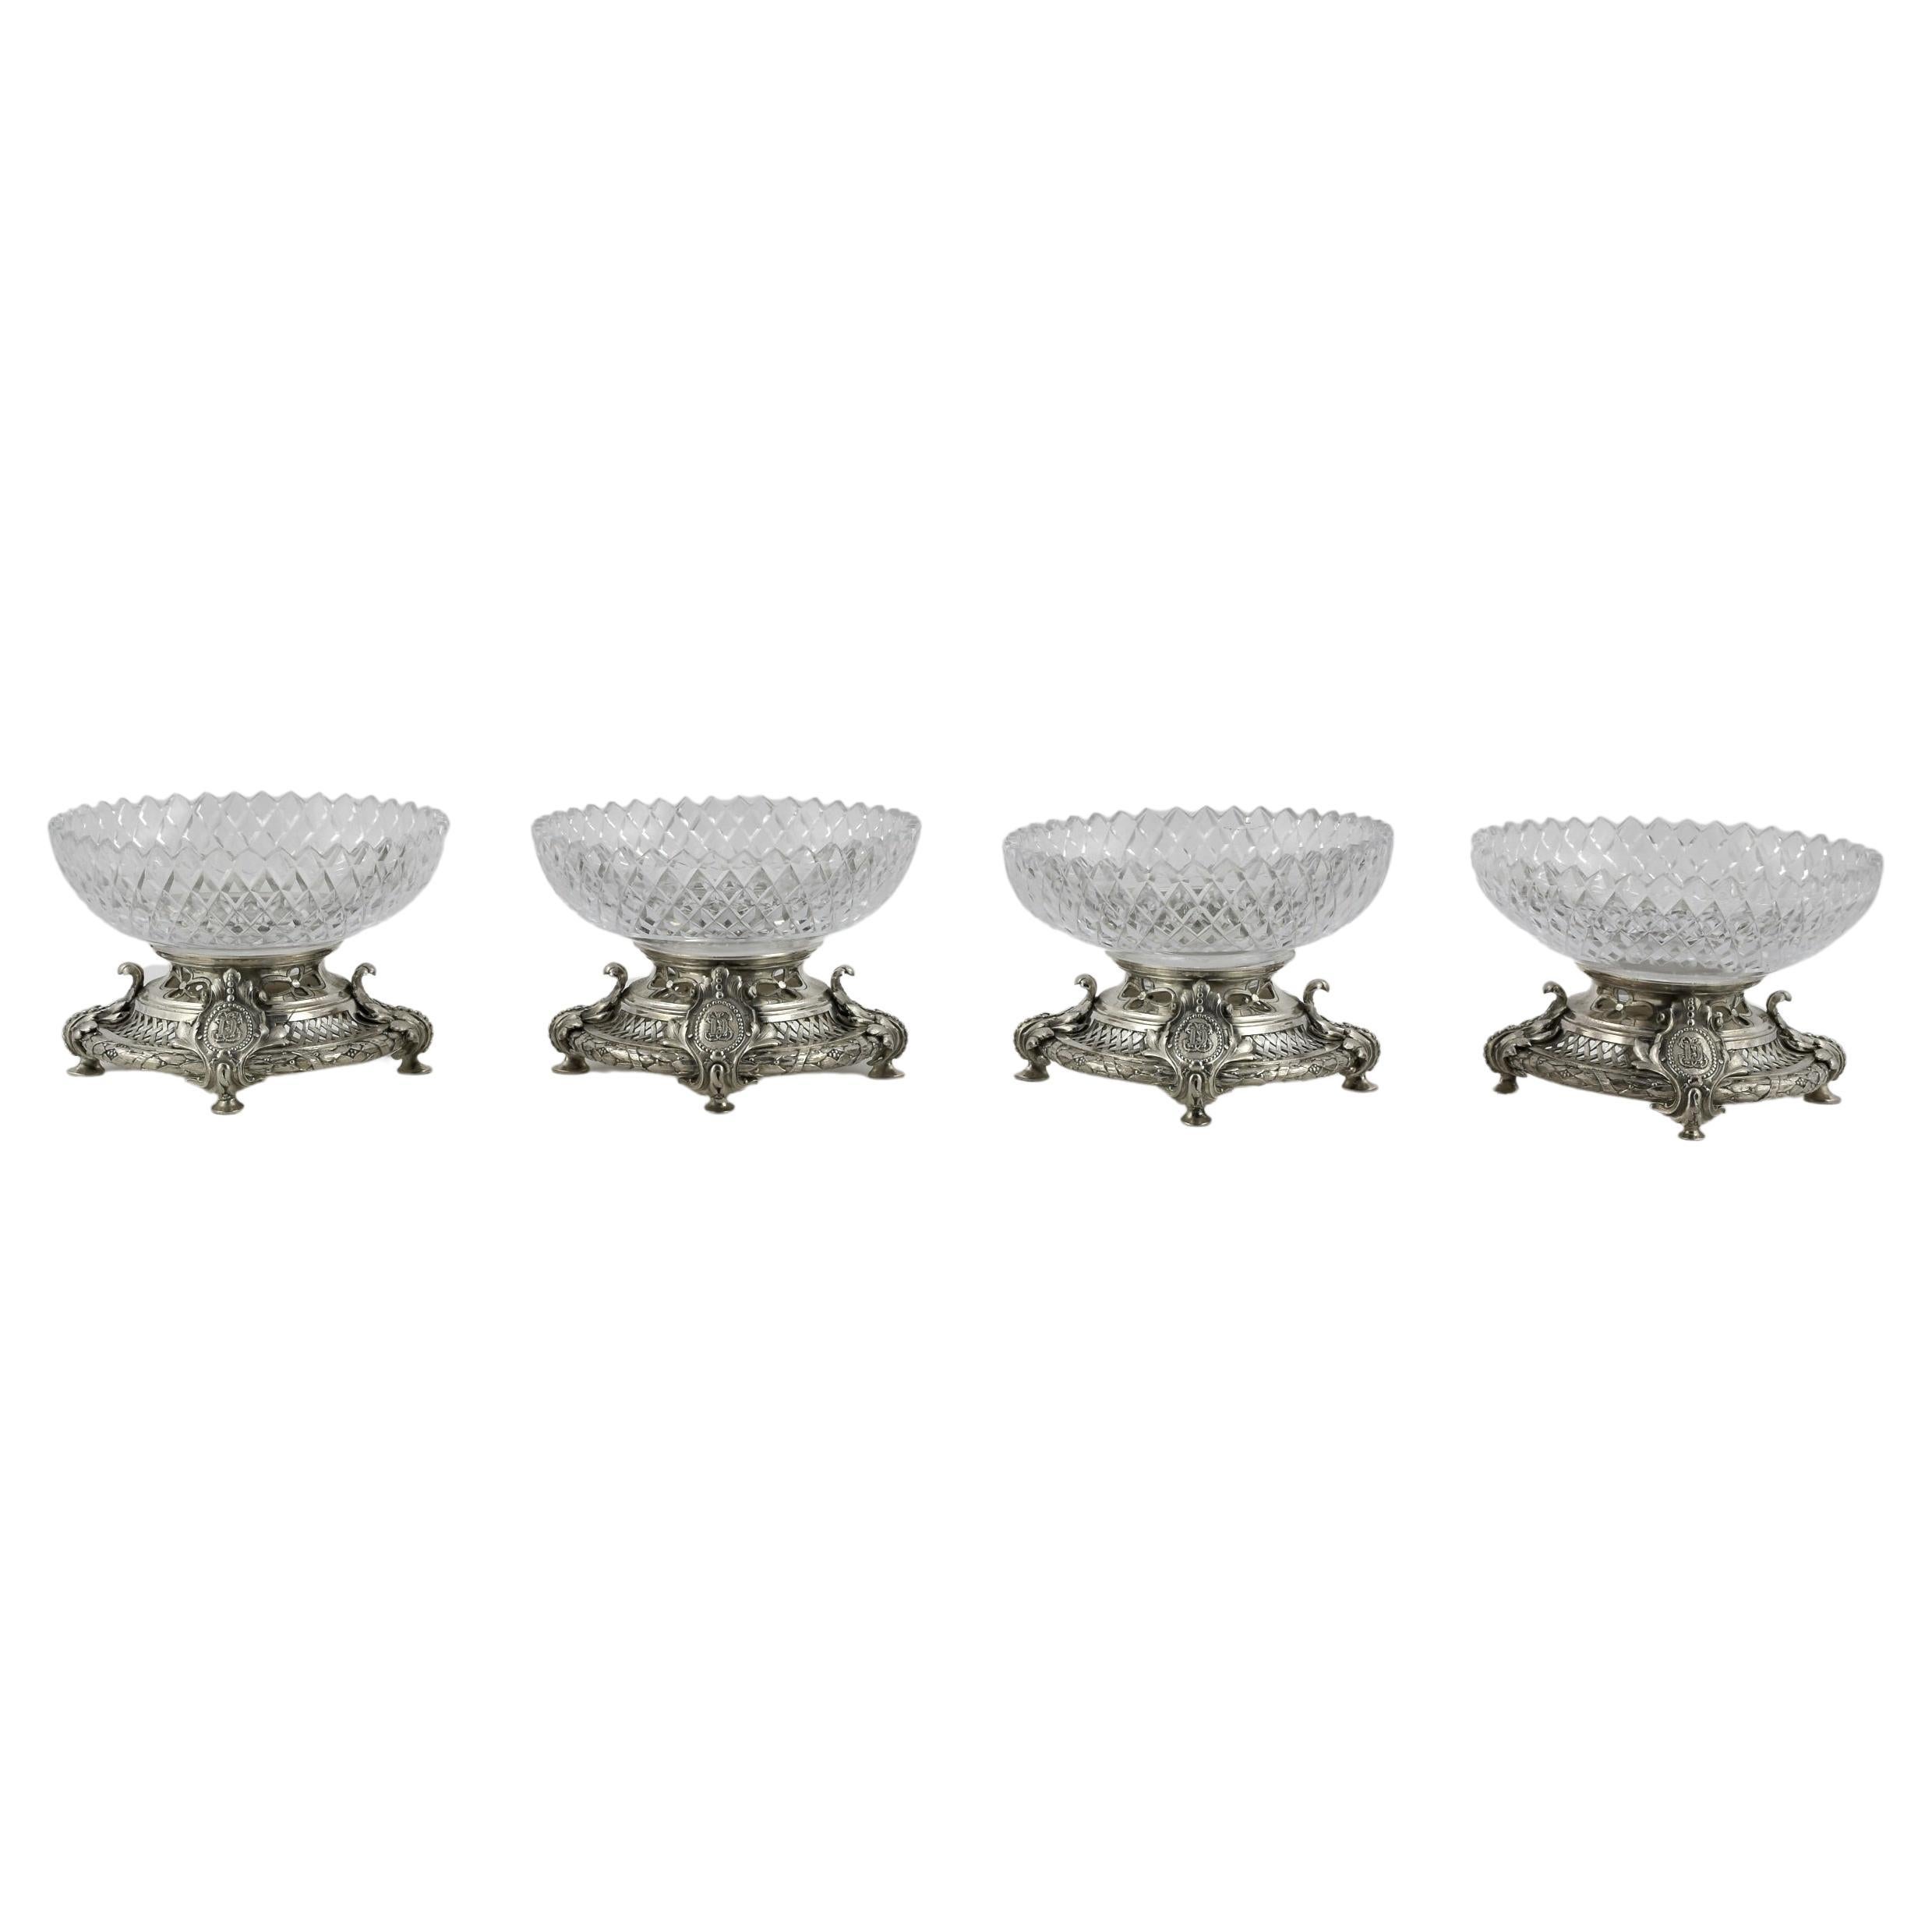 Suite of Four Silver-Plated Bronze Dessert Stand Comports, French, circa 1890 For Sale